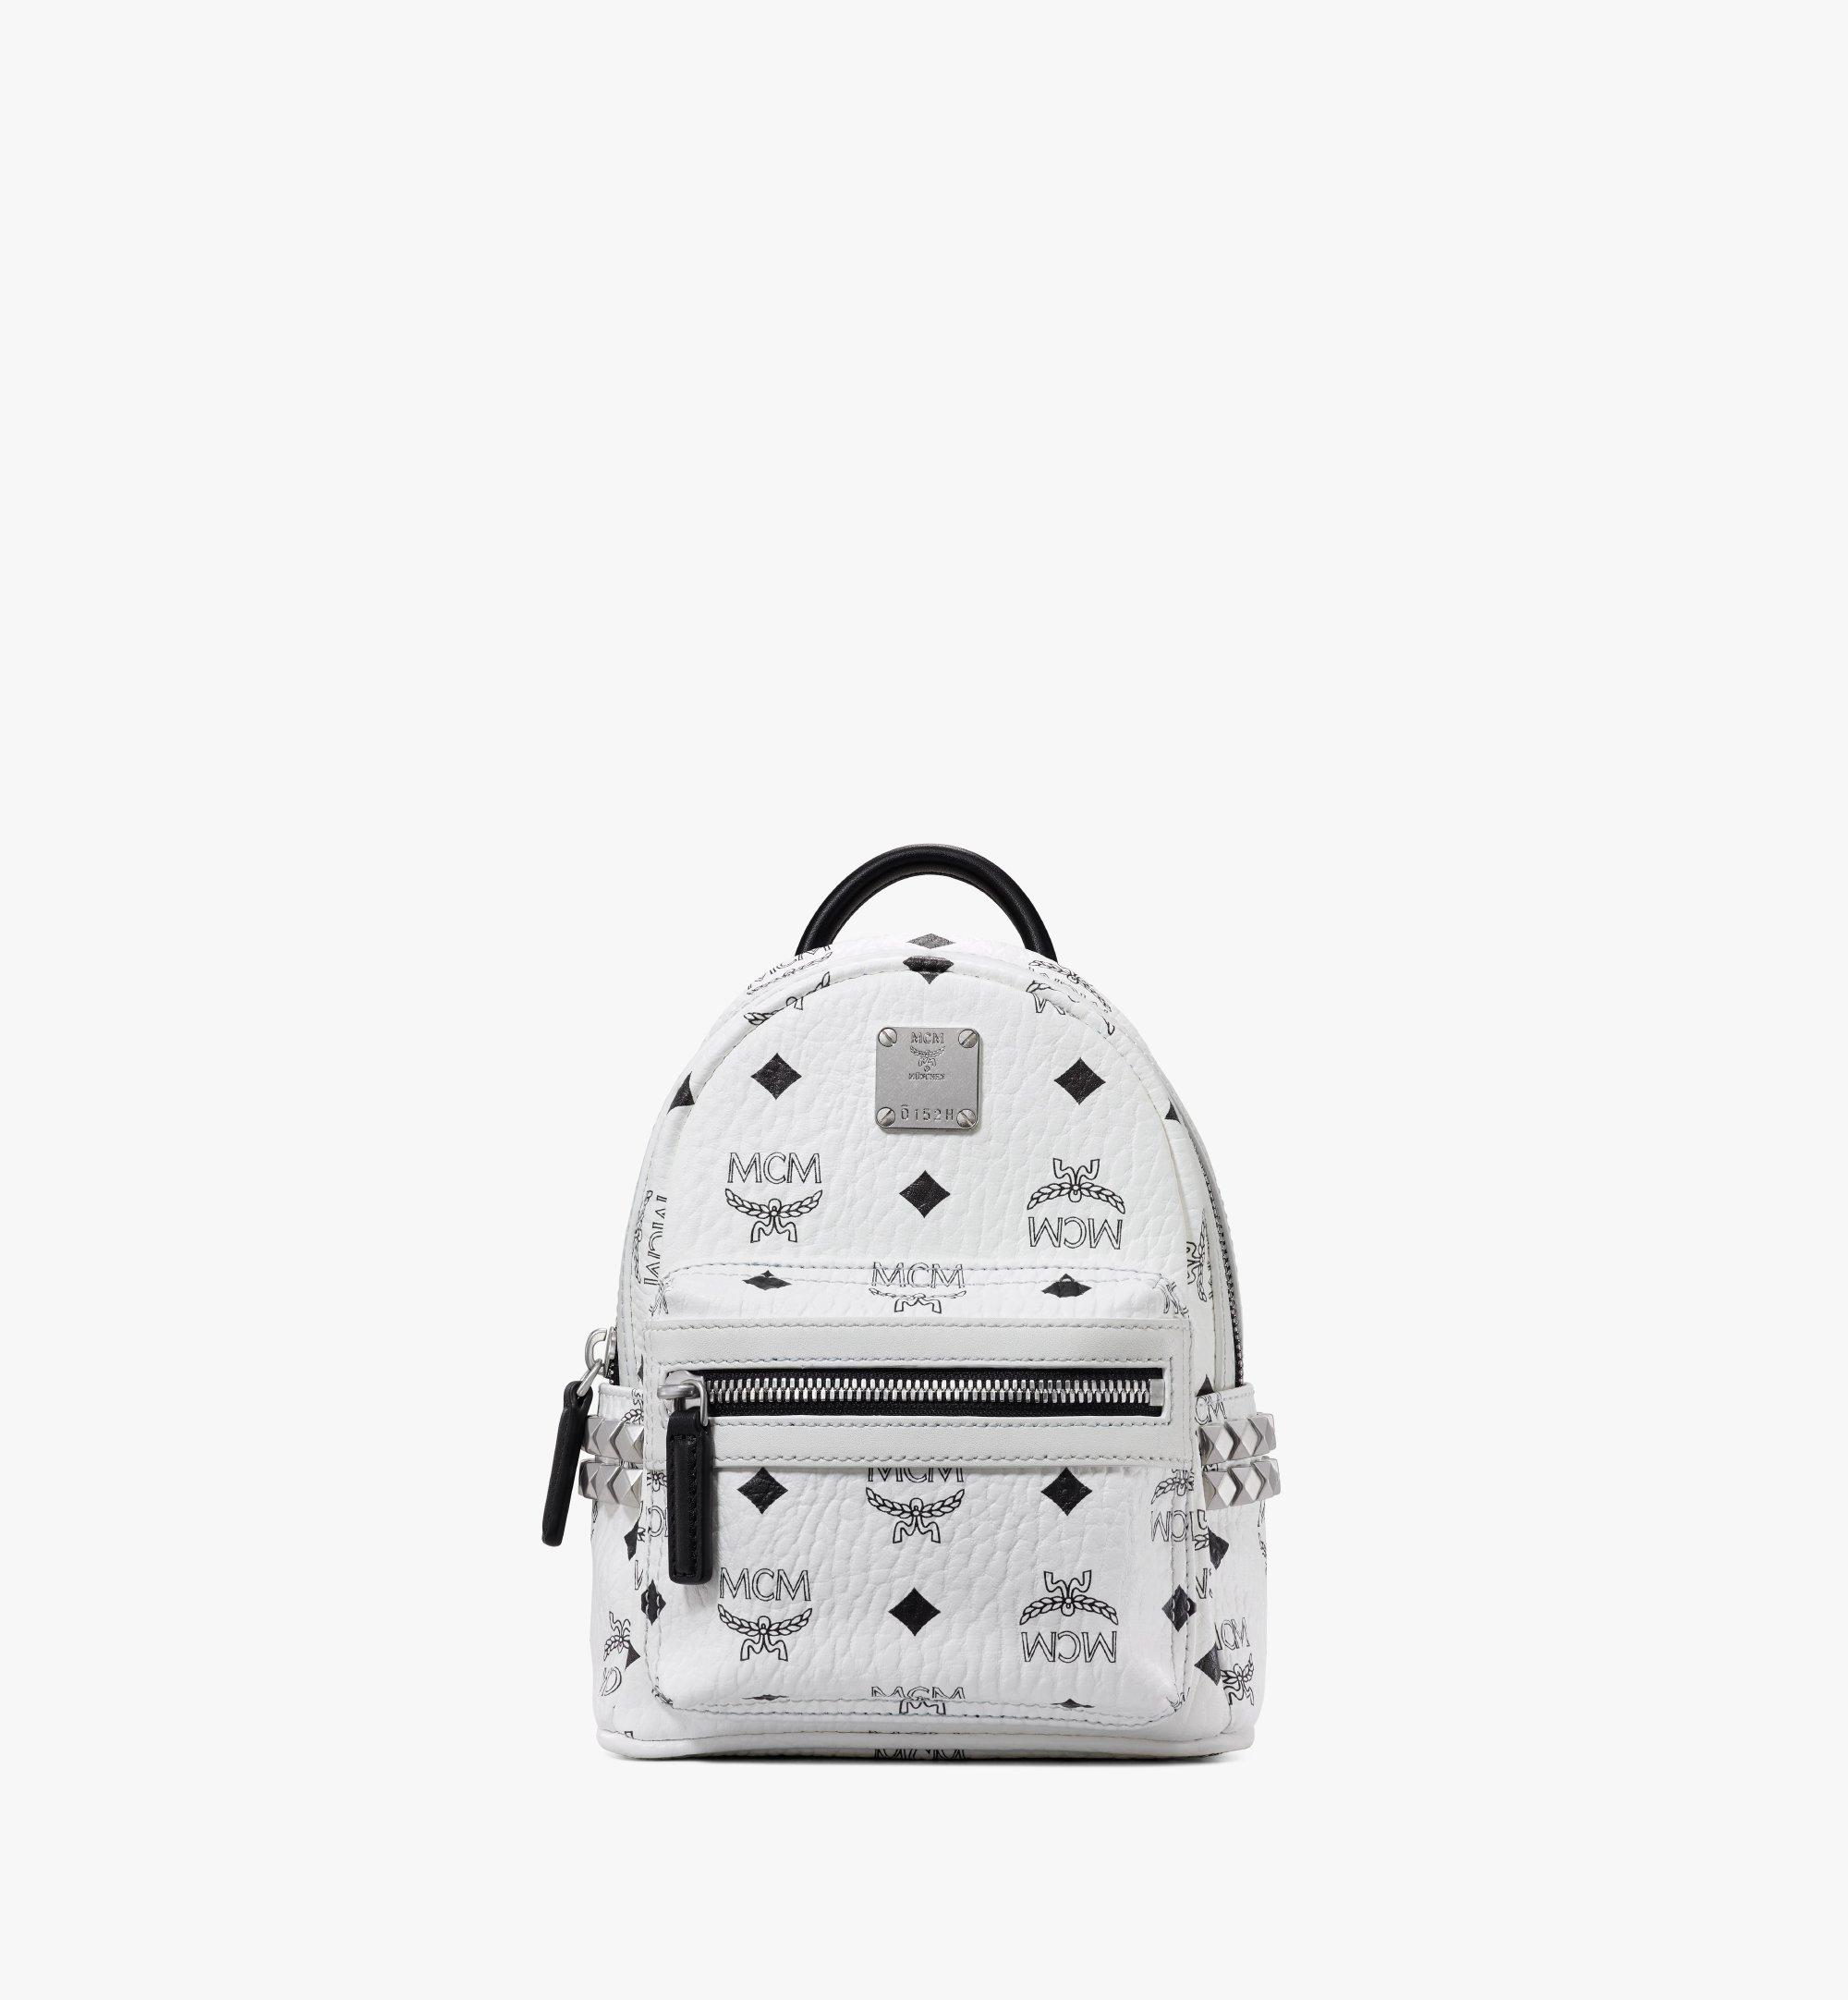 today we got an mcm backpack｜TikTok Search